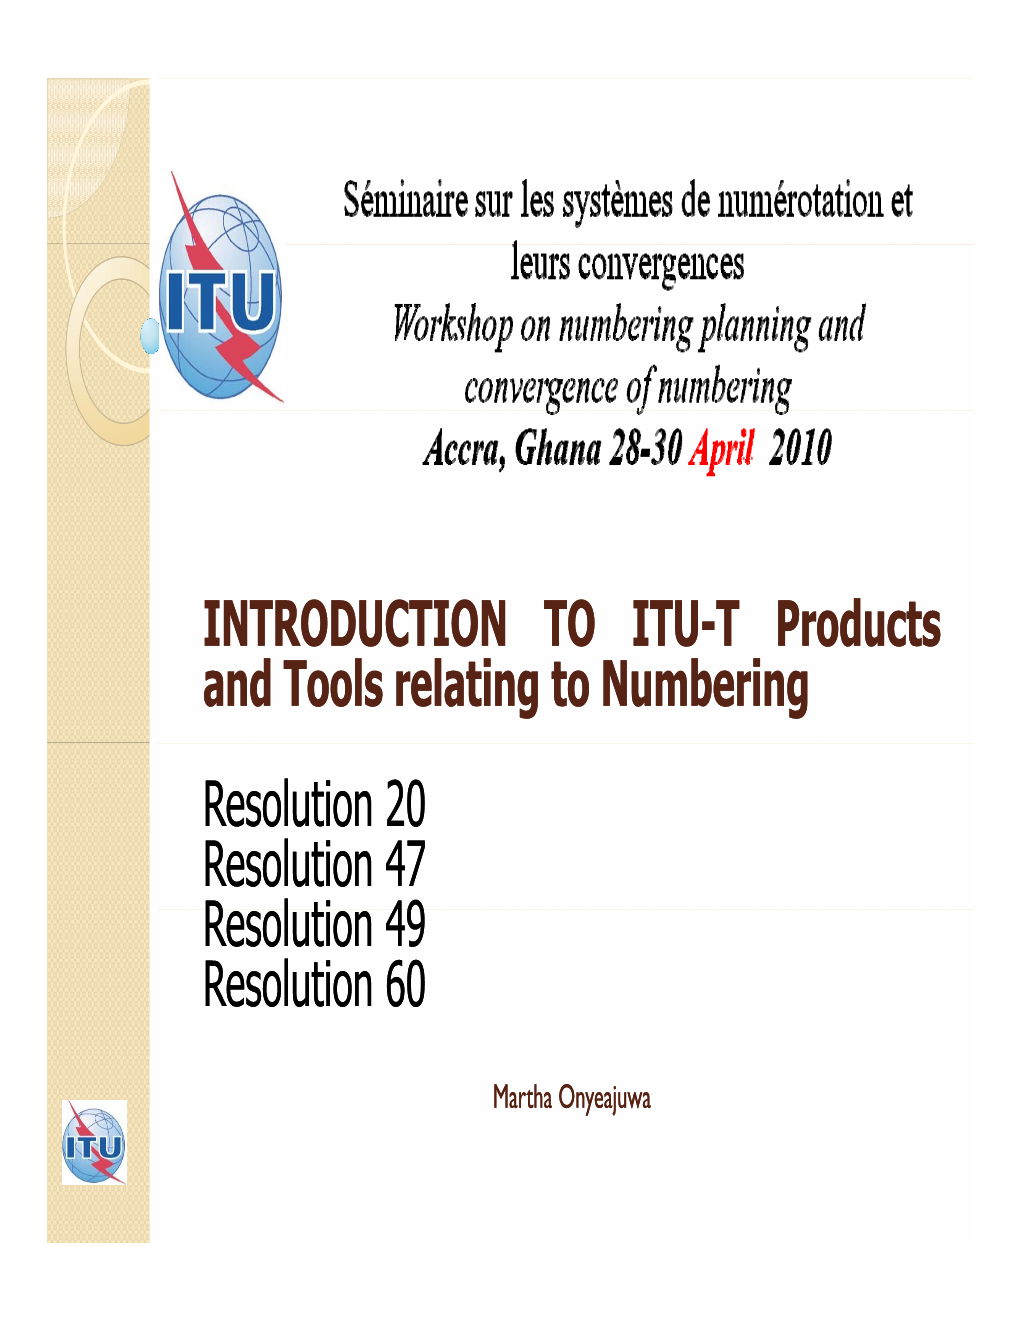 INTRODUCTION to ITU-T Products D L Li Bi and Tools Relating To